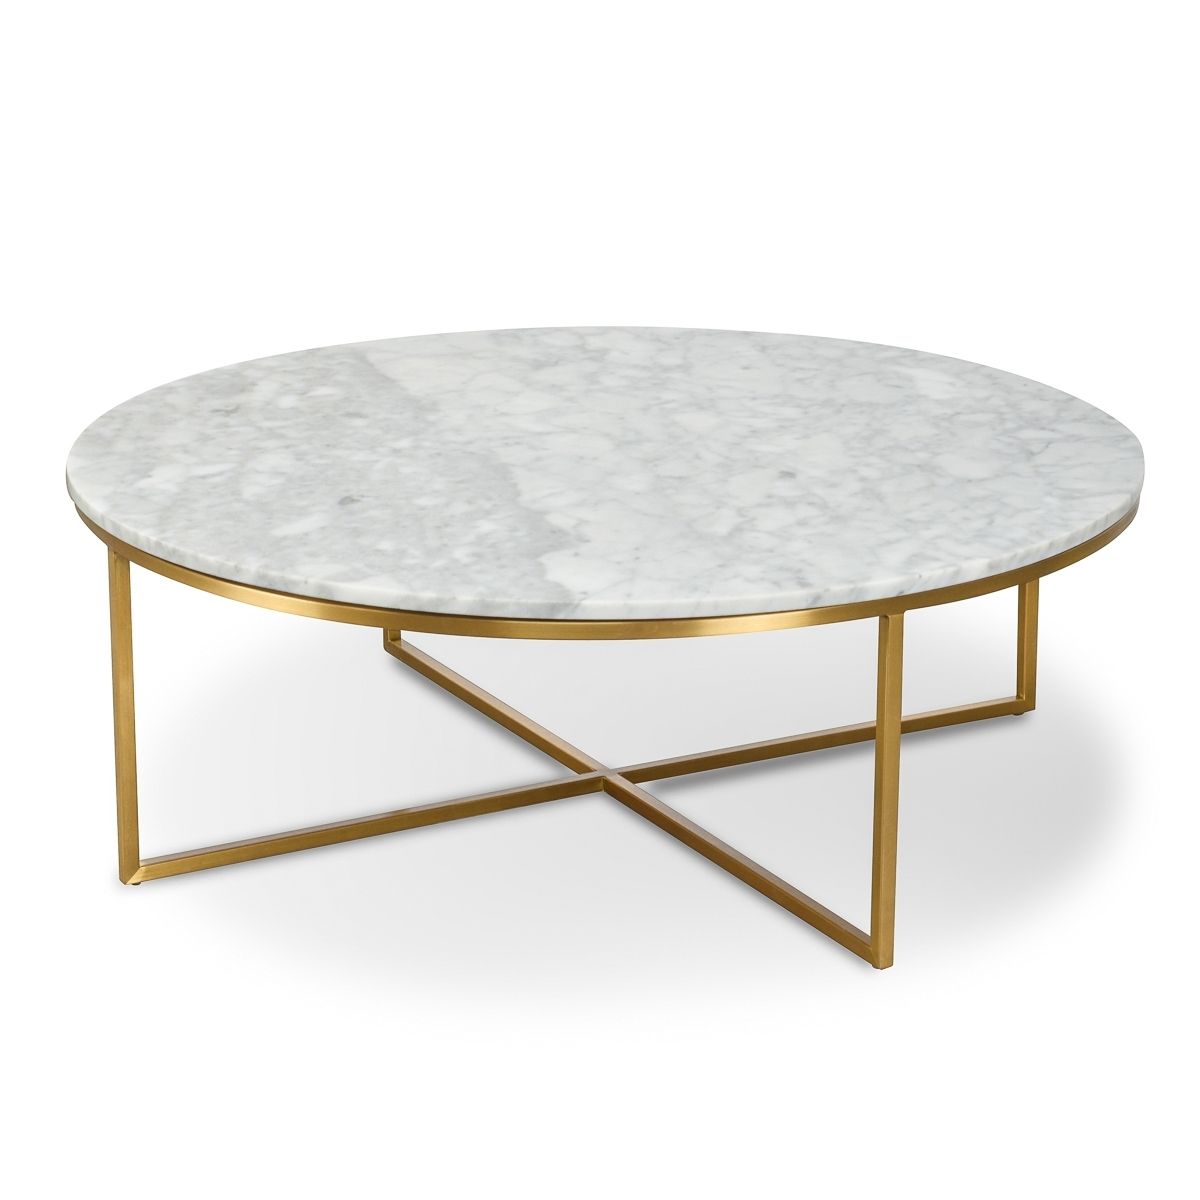 Lorenz Round Marble Coffee Table | Interior Secrets Within 2 Tone Grey And White Marble Coffee Tables (View 5 of 30)